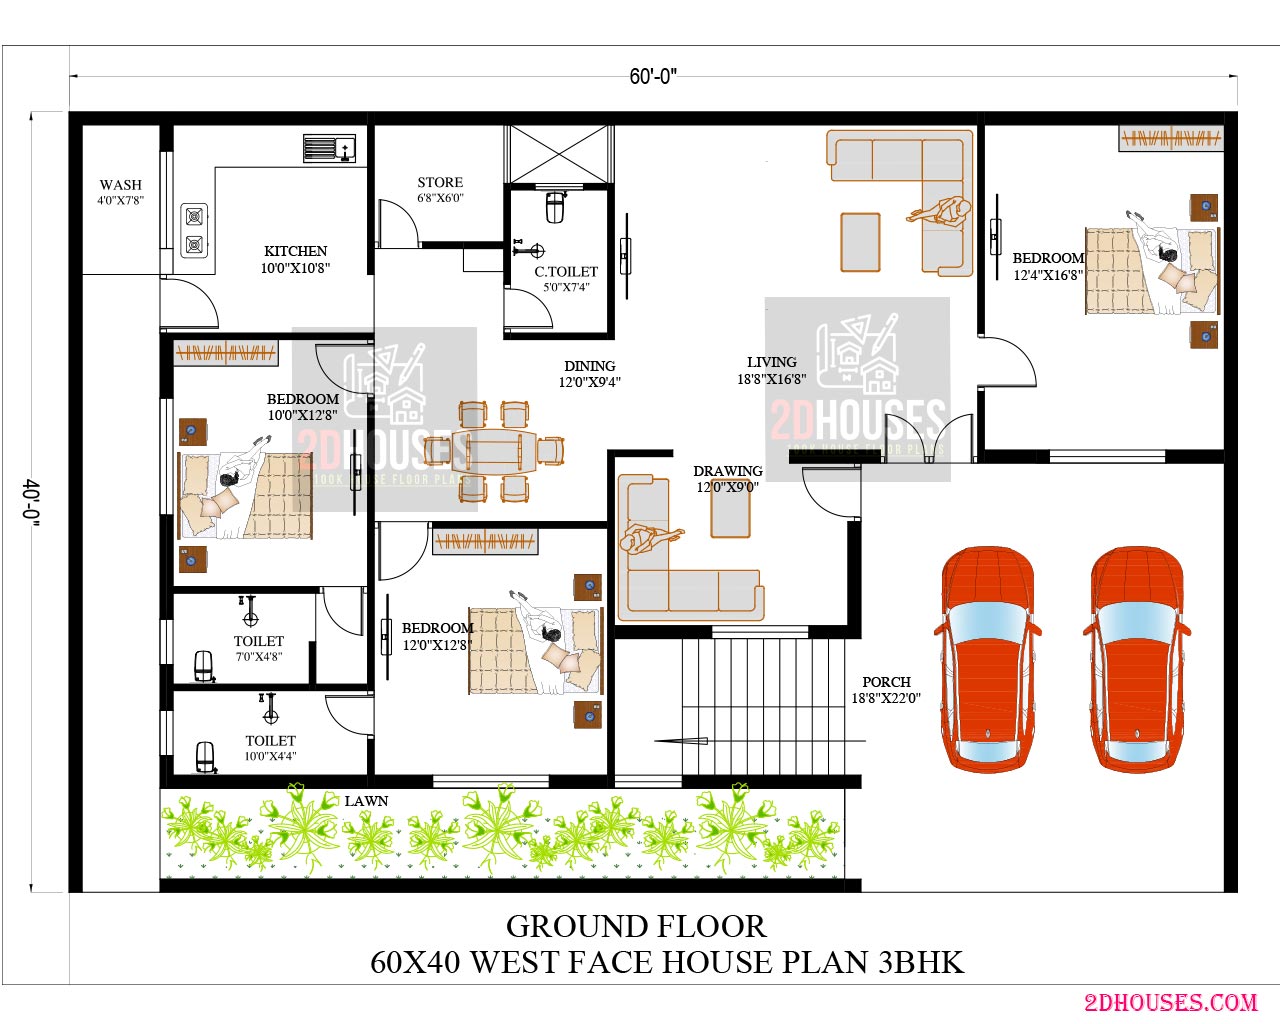 60x40 house plans pdf west facing with 3 room